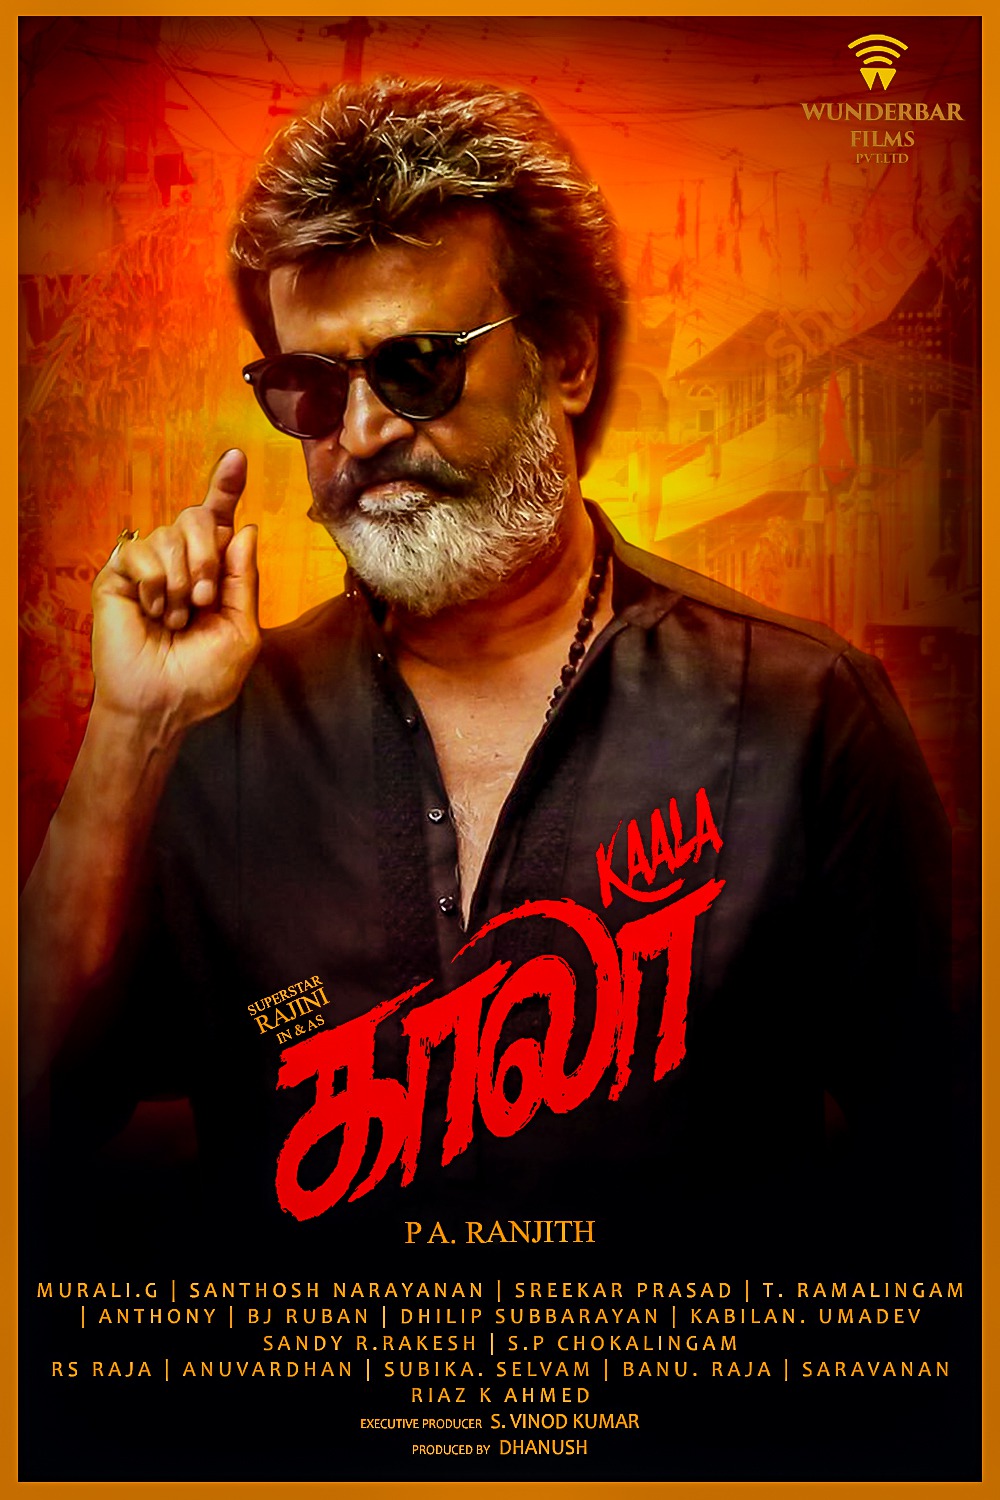 Extra Large Movie Poster Image for Kaala 